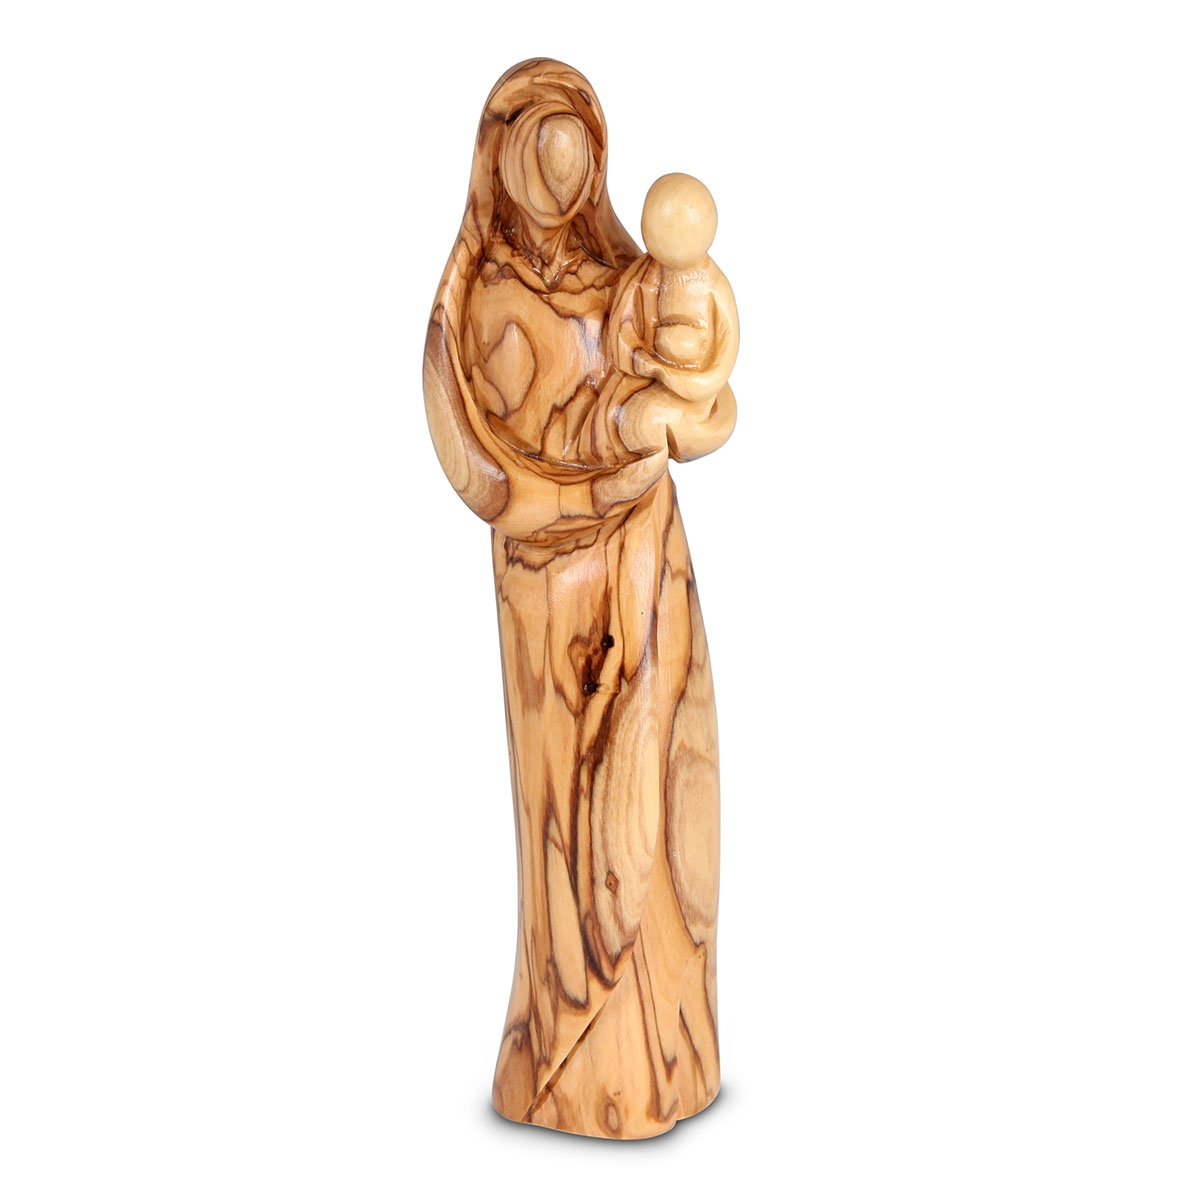 Olive Wood Hand-Carved Holy Mother and Child Figurine - 1